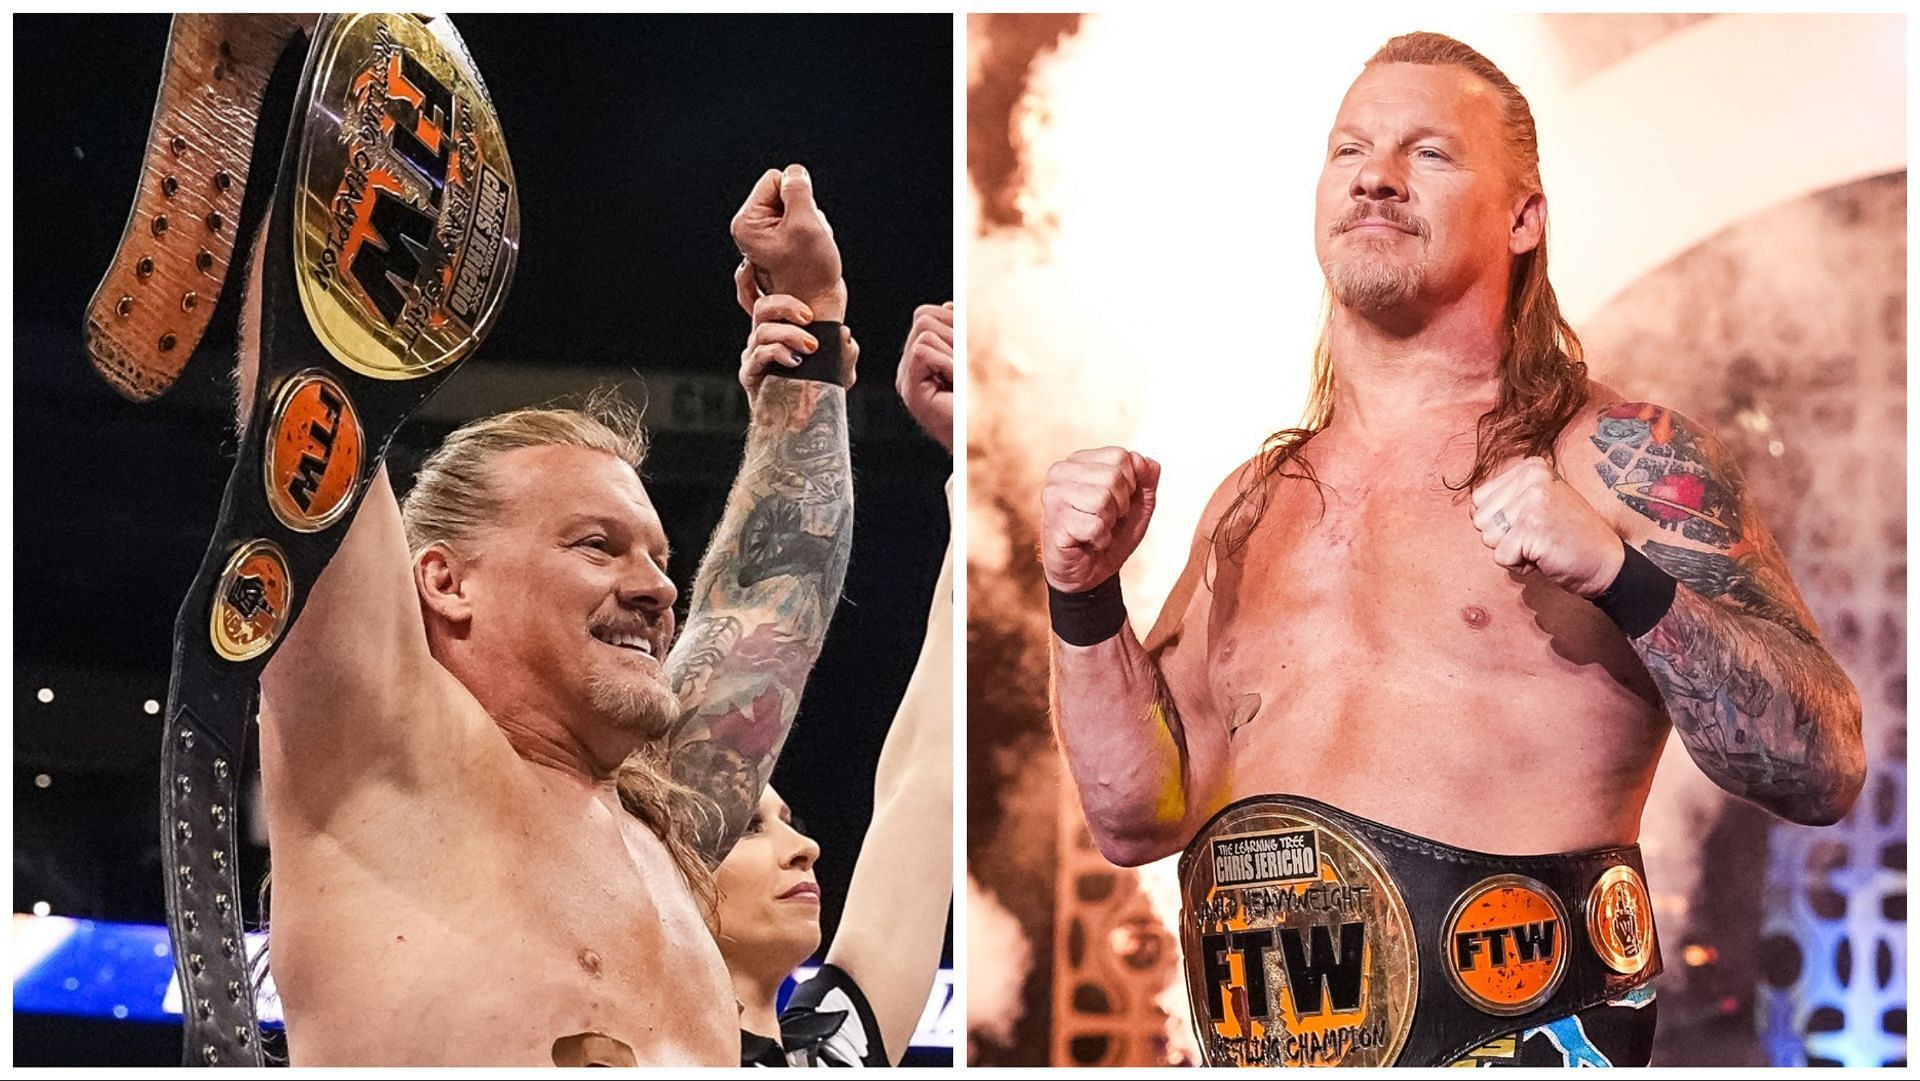 Chris Jericho celebrates with the FTW Championship on AEW Dynamite